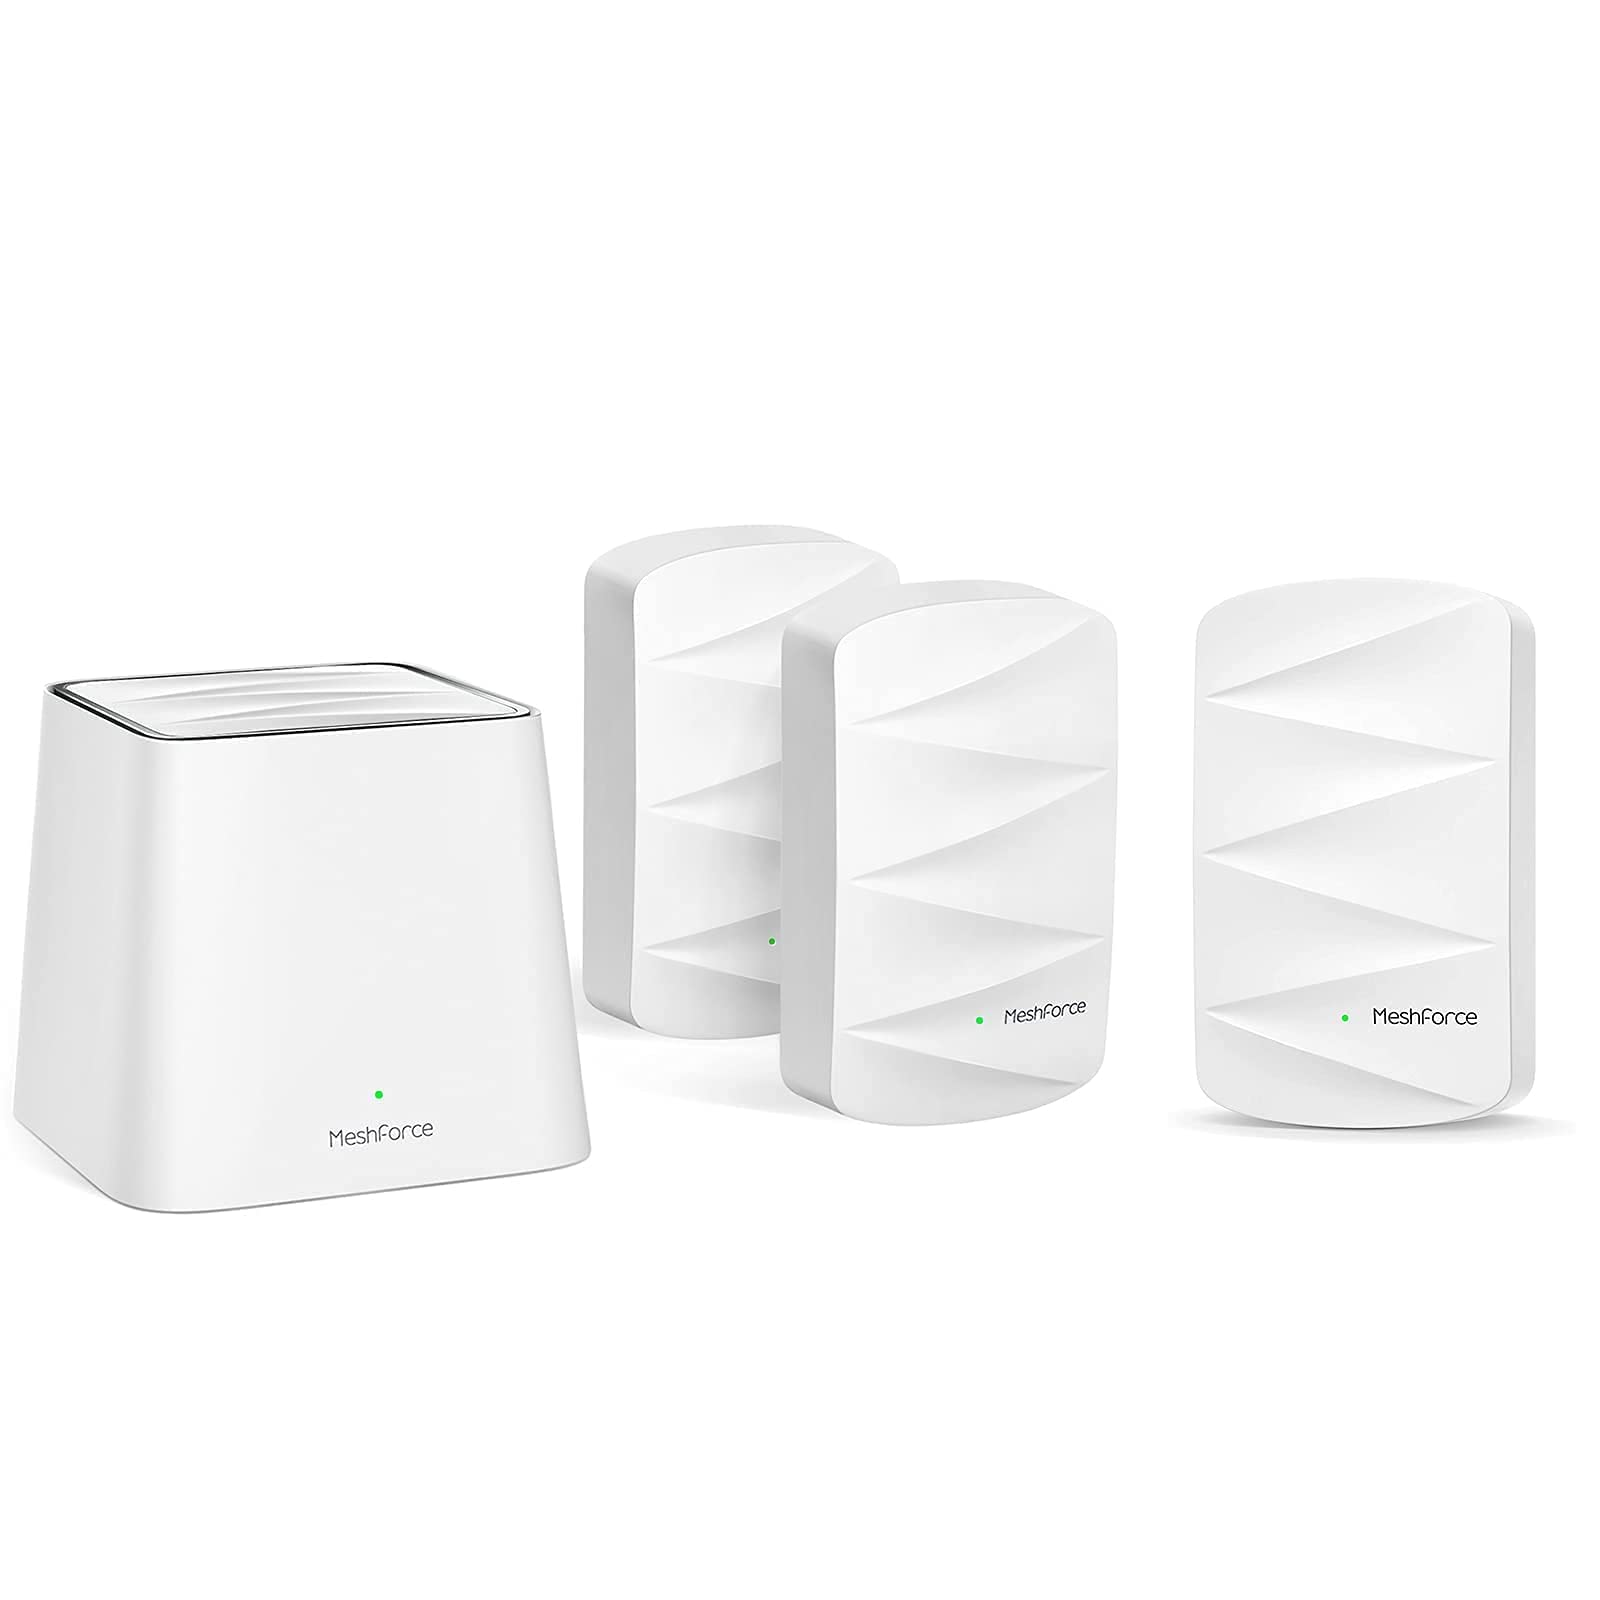 Meshforce M3 Mesh WiFi System (4 Pack), Up to 6000 sq.ft （8+ Rooms） Whole Home Coverage, WiFi Router Replacement, Parental Control, Plug-in Design (1 WiFi Point & 3 Dots)